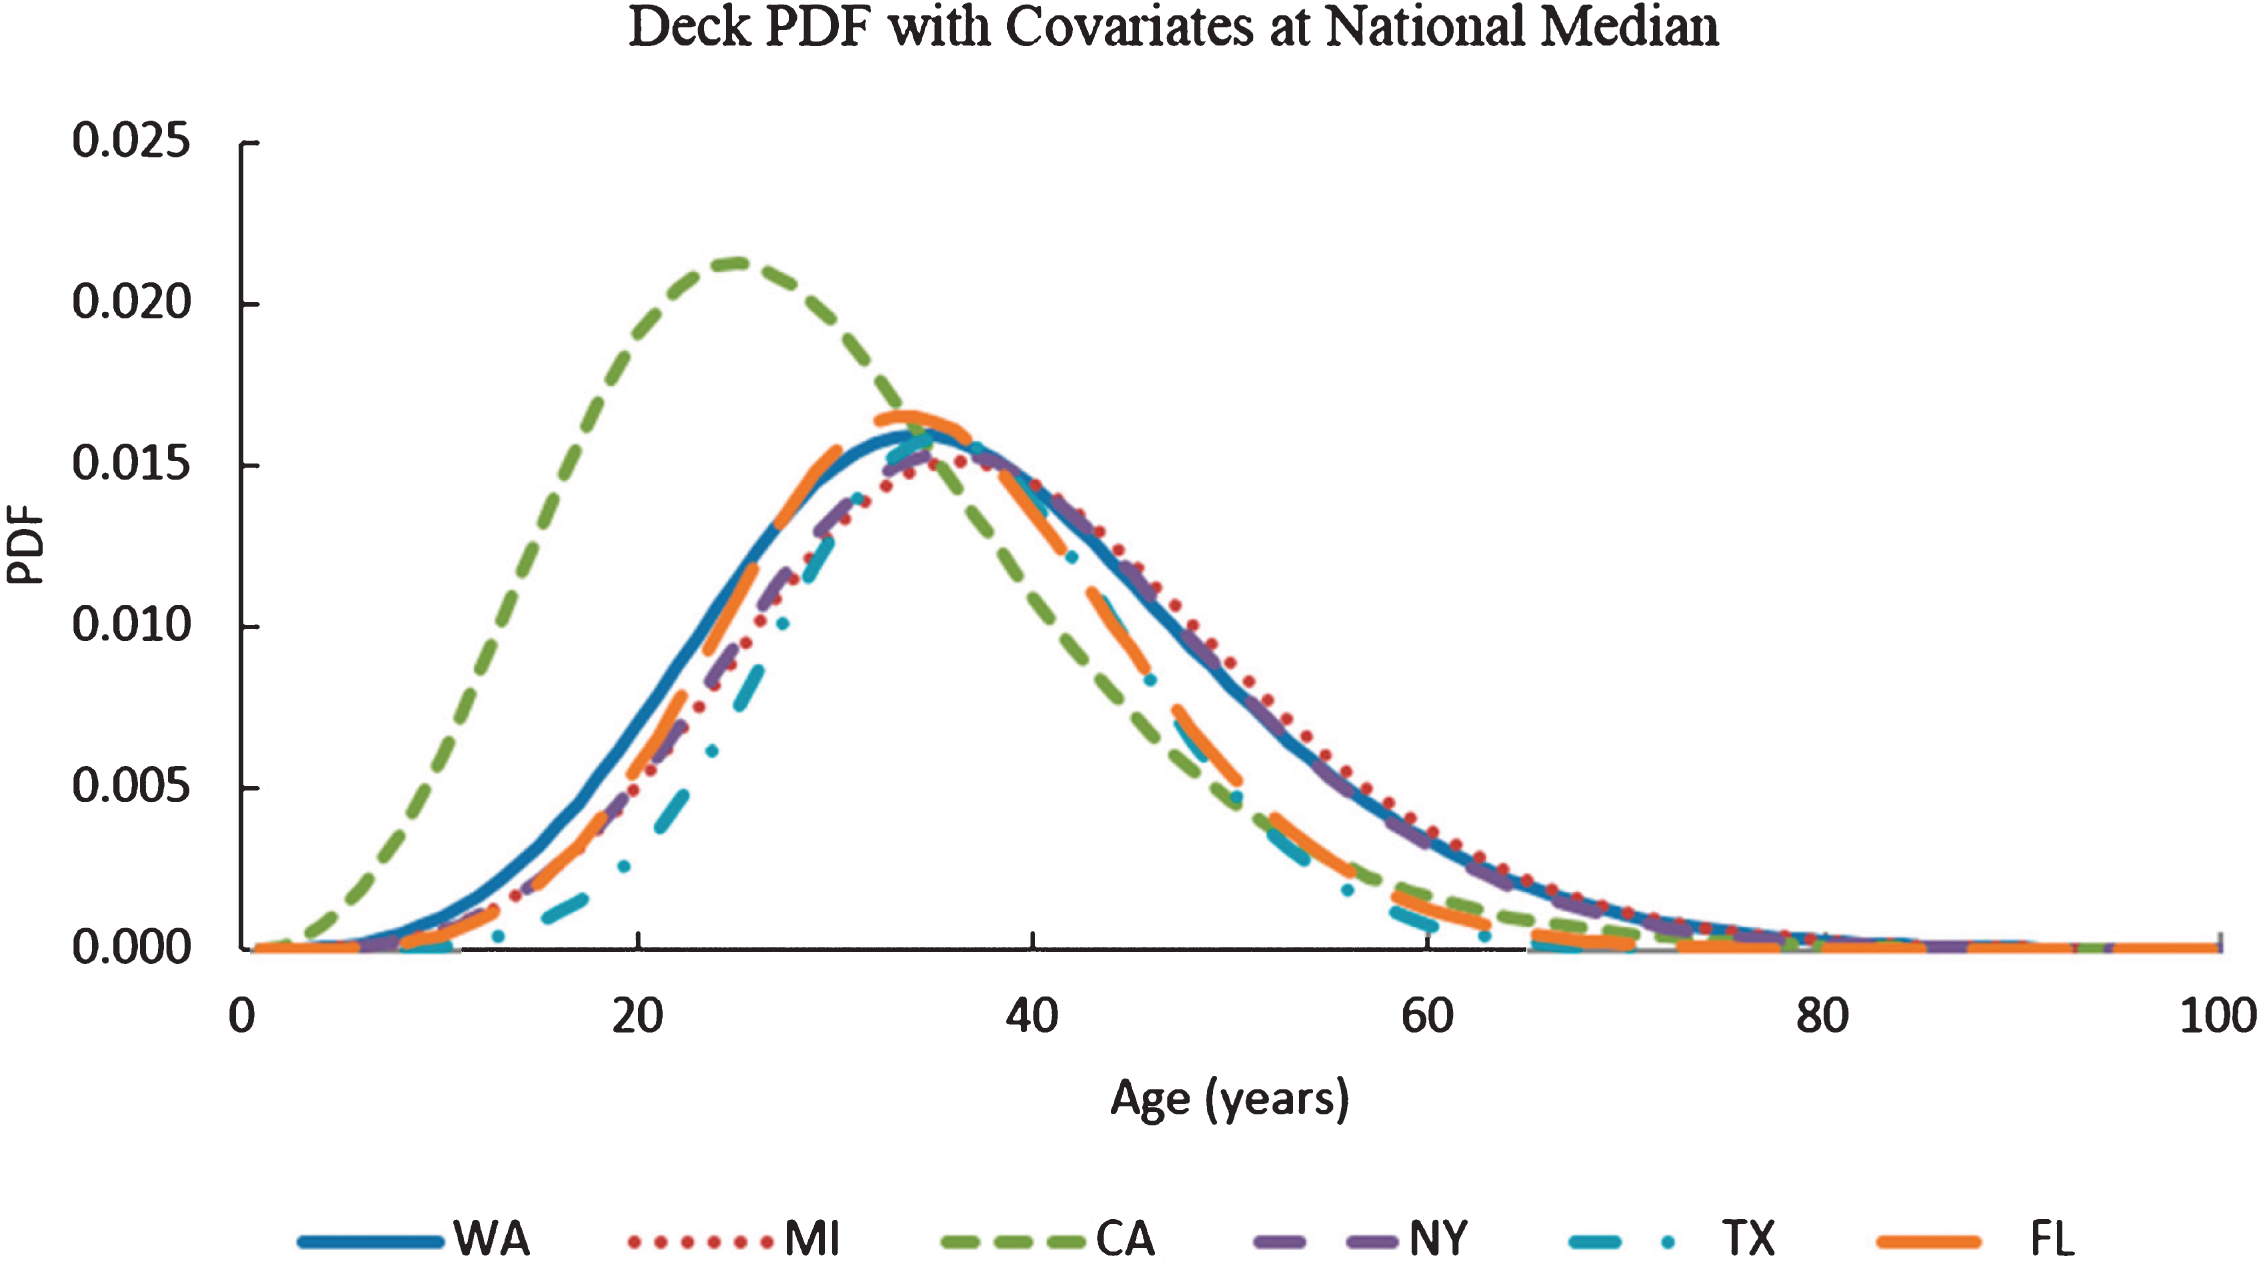 Variation of deck probability density function (PDF) with age for Washington State, California, Michigan, Florida, Texas, and New York with ADT and deck areas at national median (ADT = 1703 and deck area = 355.3 m2).